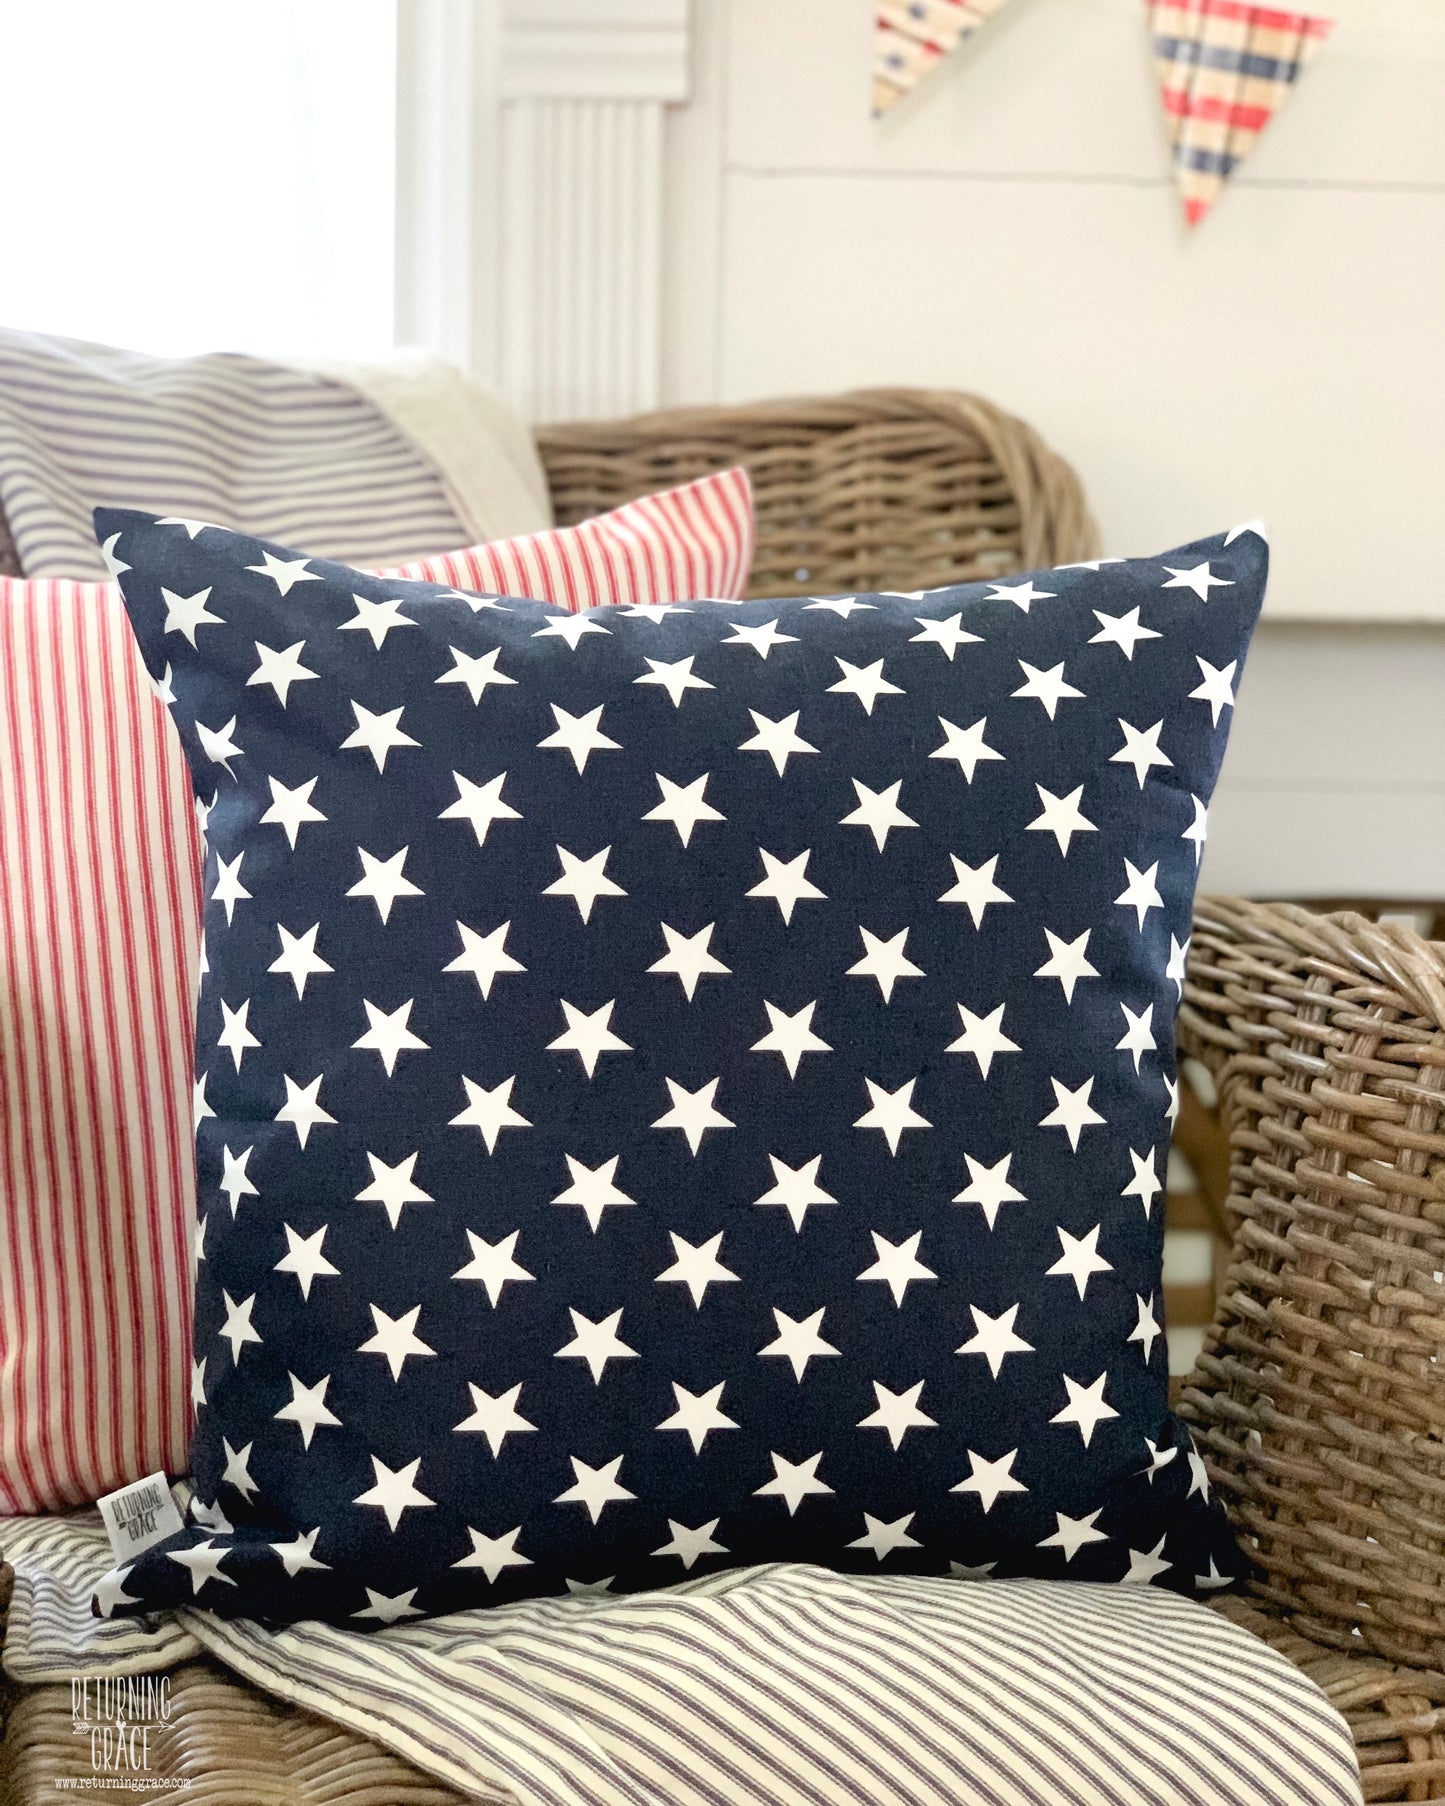 Navy with White Stars Pillow Cover - Returning Grace Designs